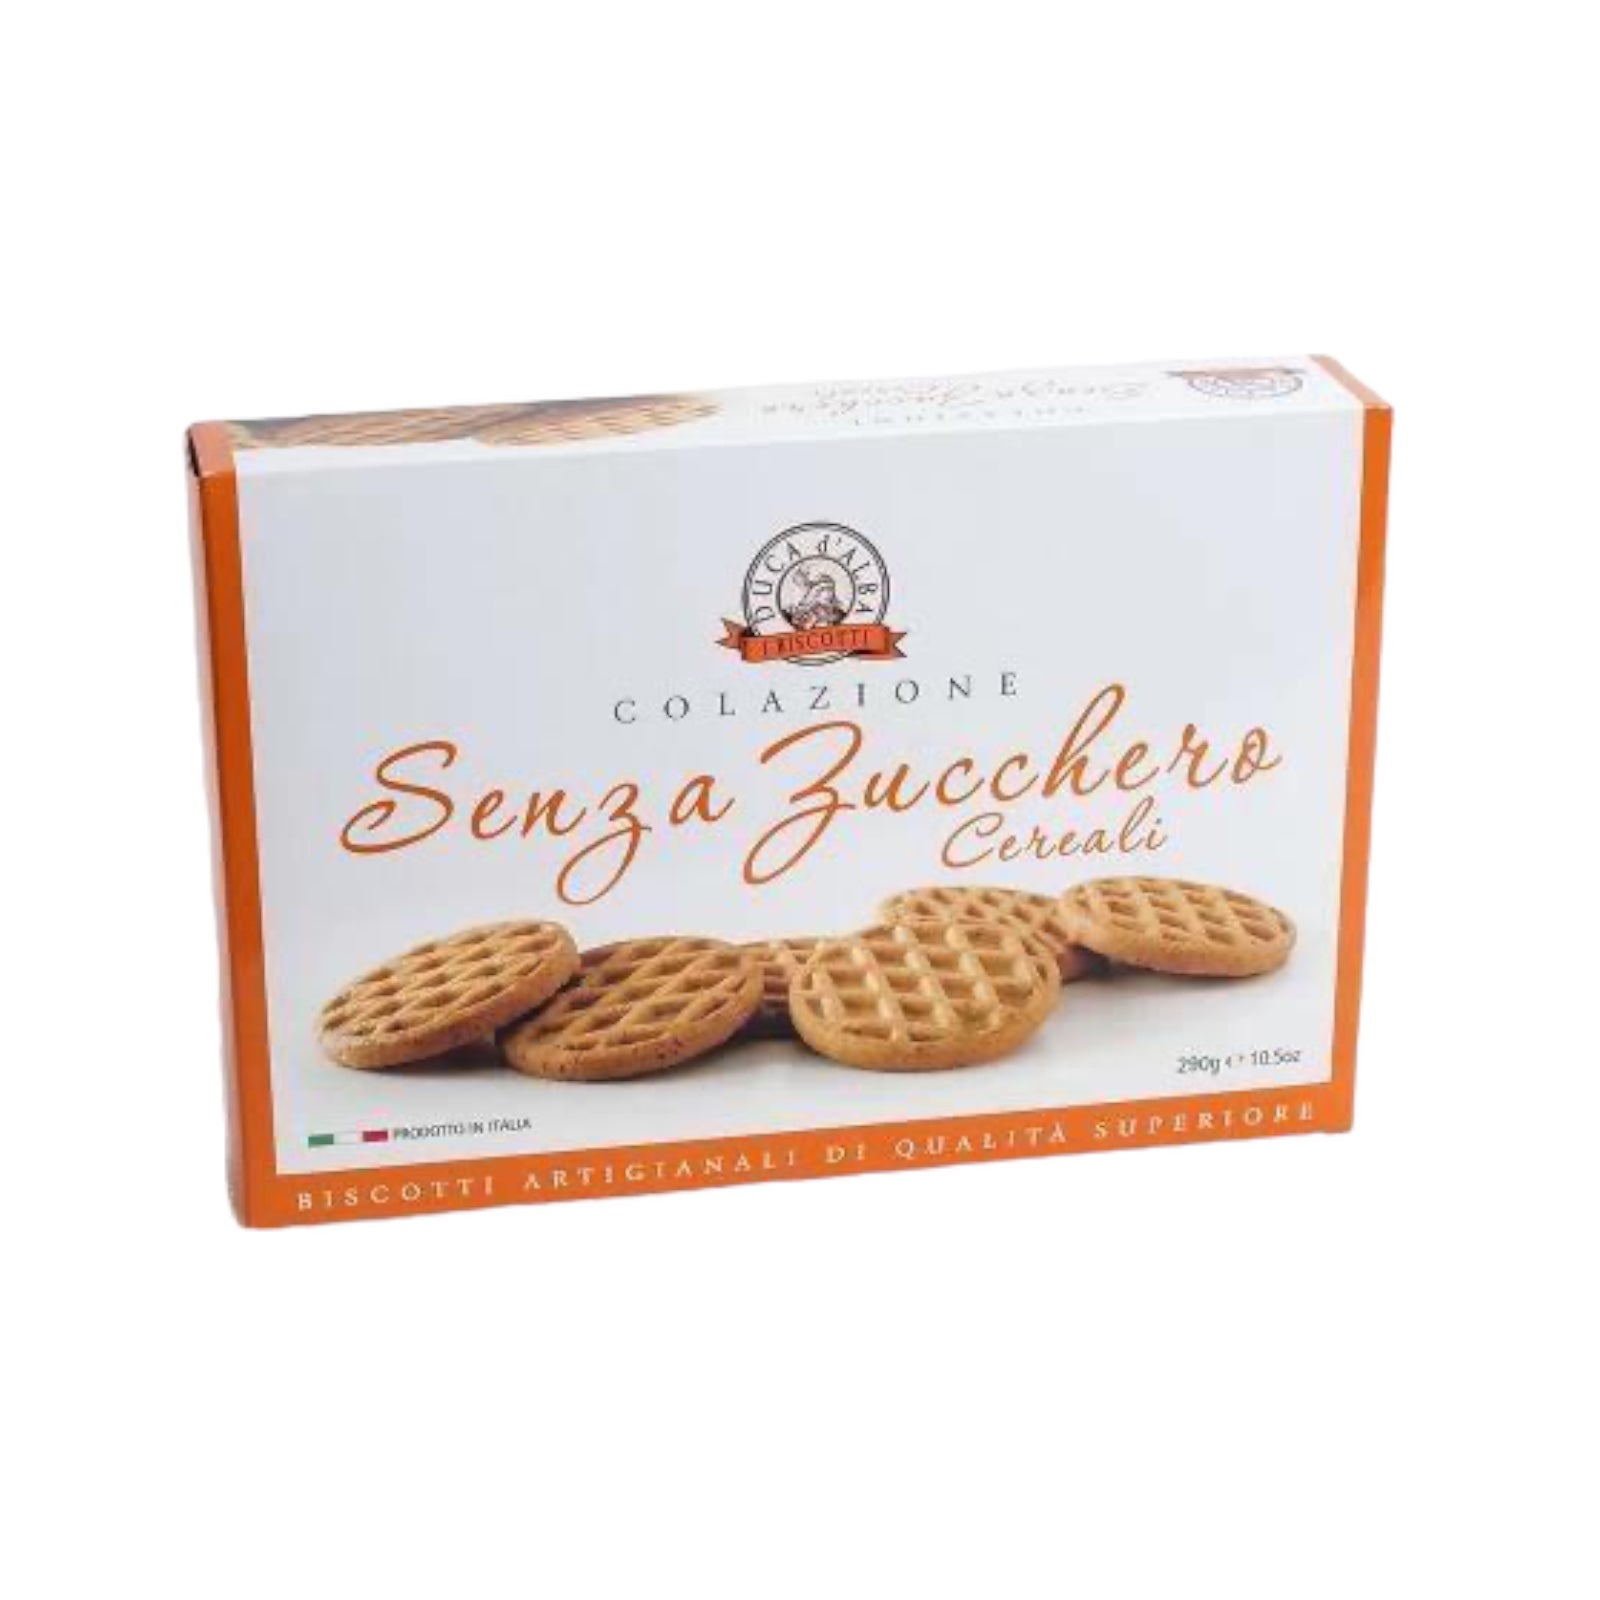 Sugar-Free Cookies With Cereals By Duca D’alba 290g